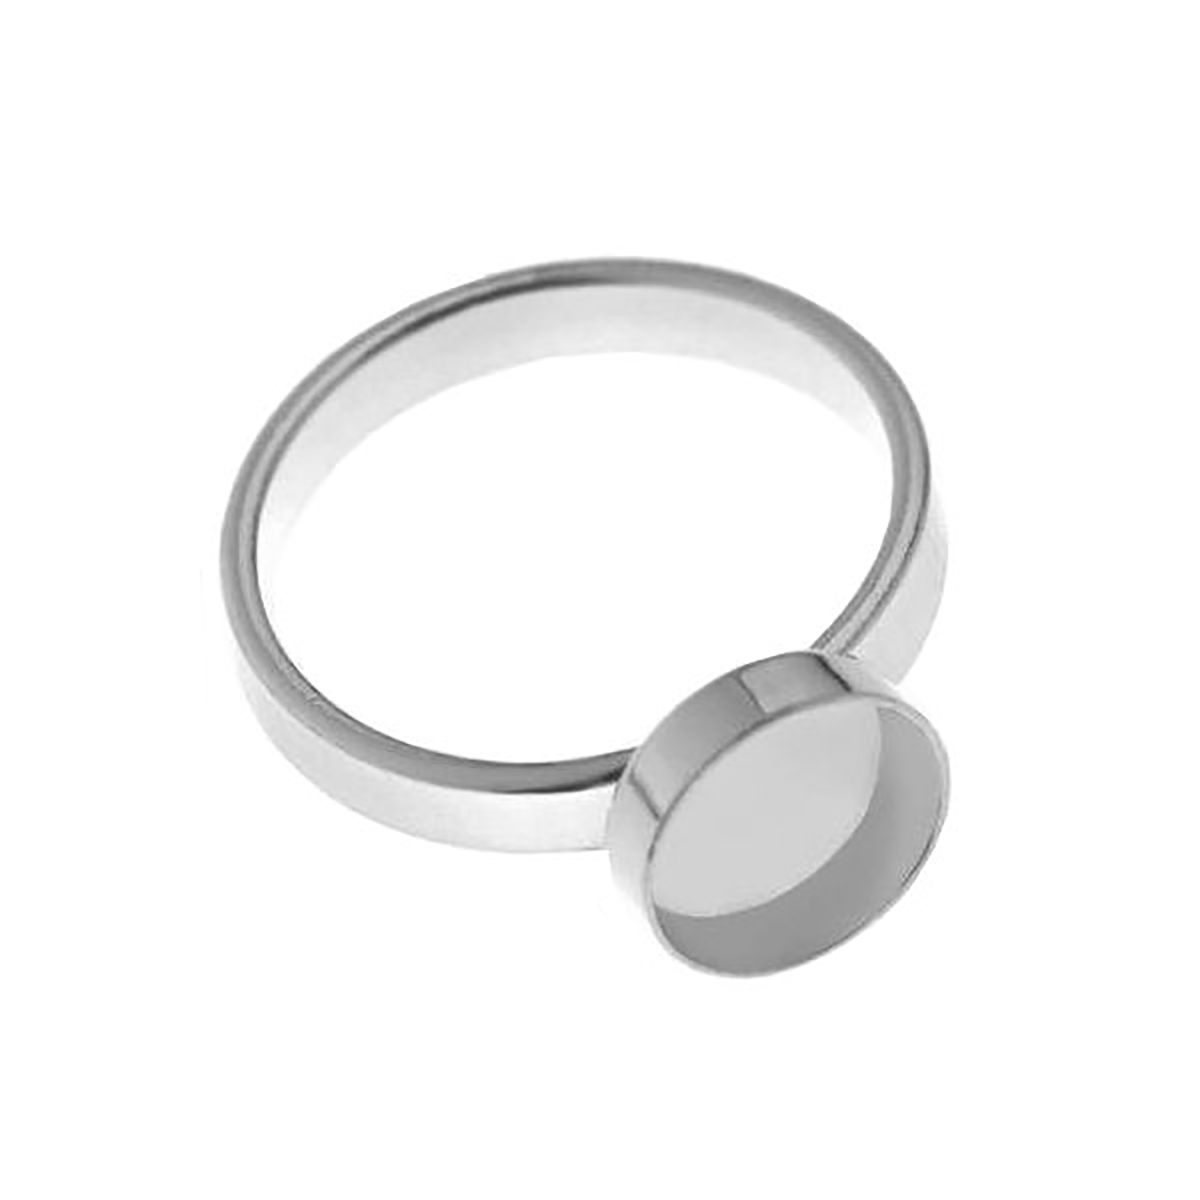 ring settings for loose stones